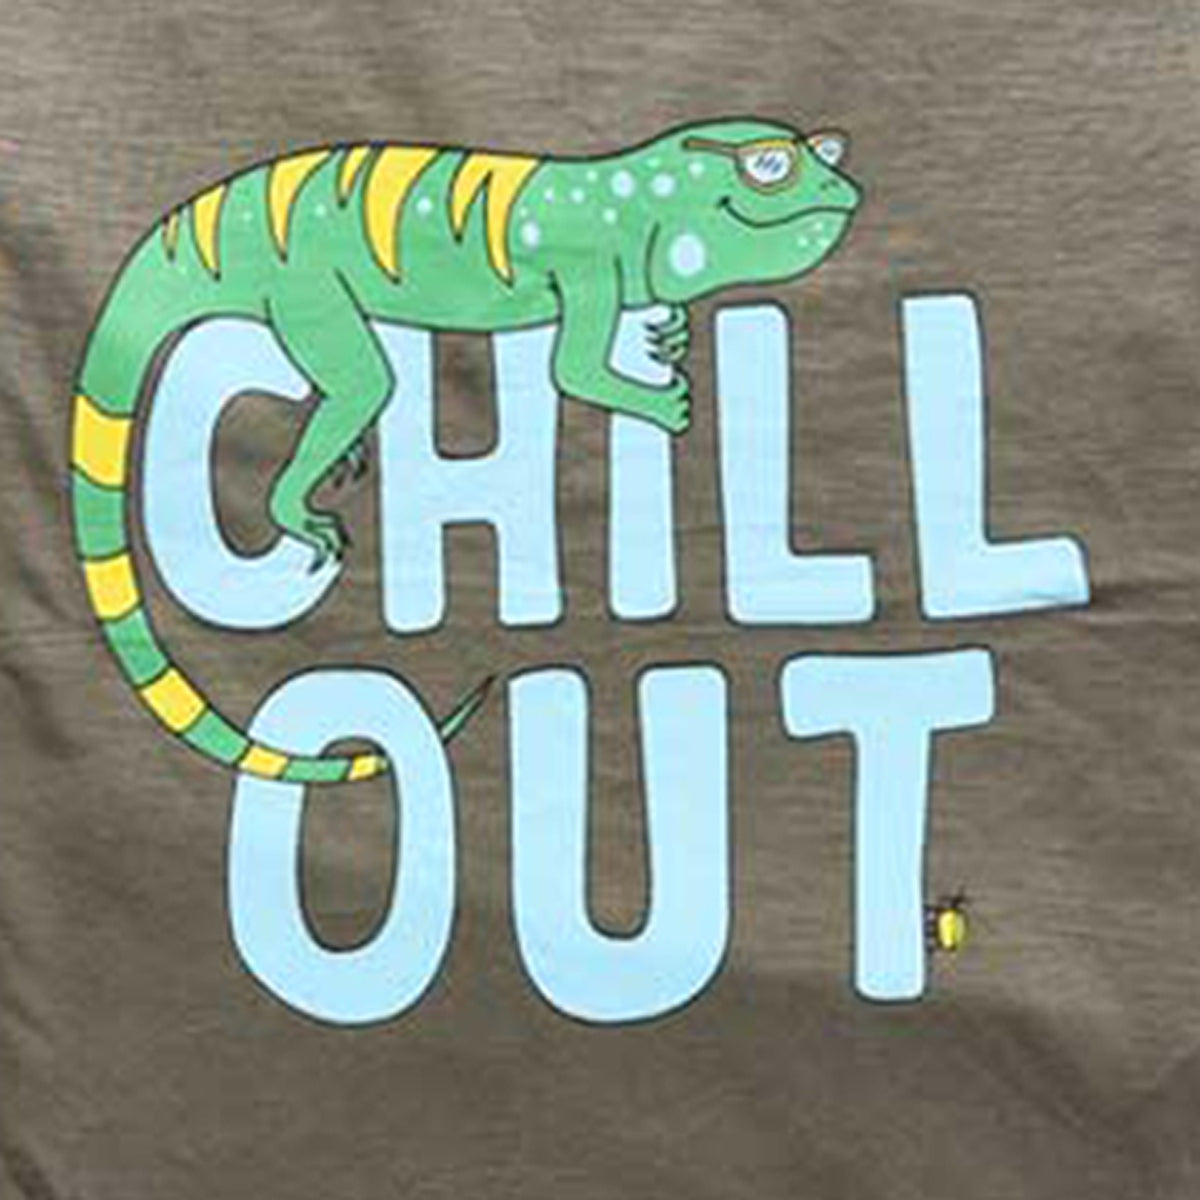 Boys Olive Green 'Chill Out' Dinosaur Graphic T-Shirt